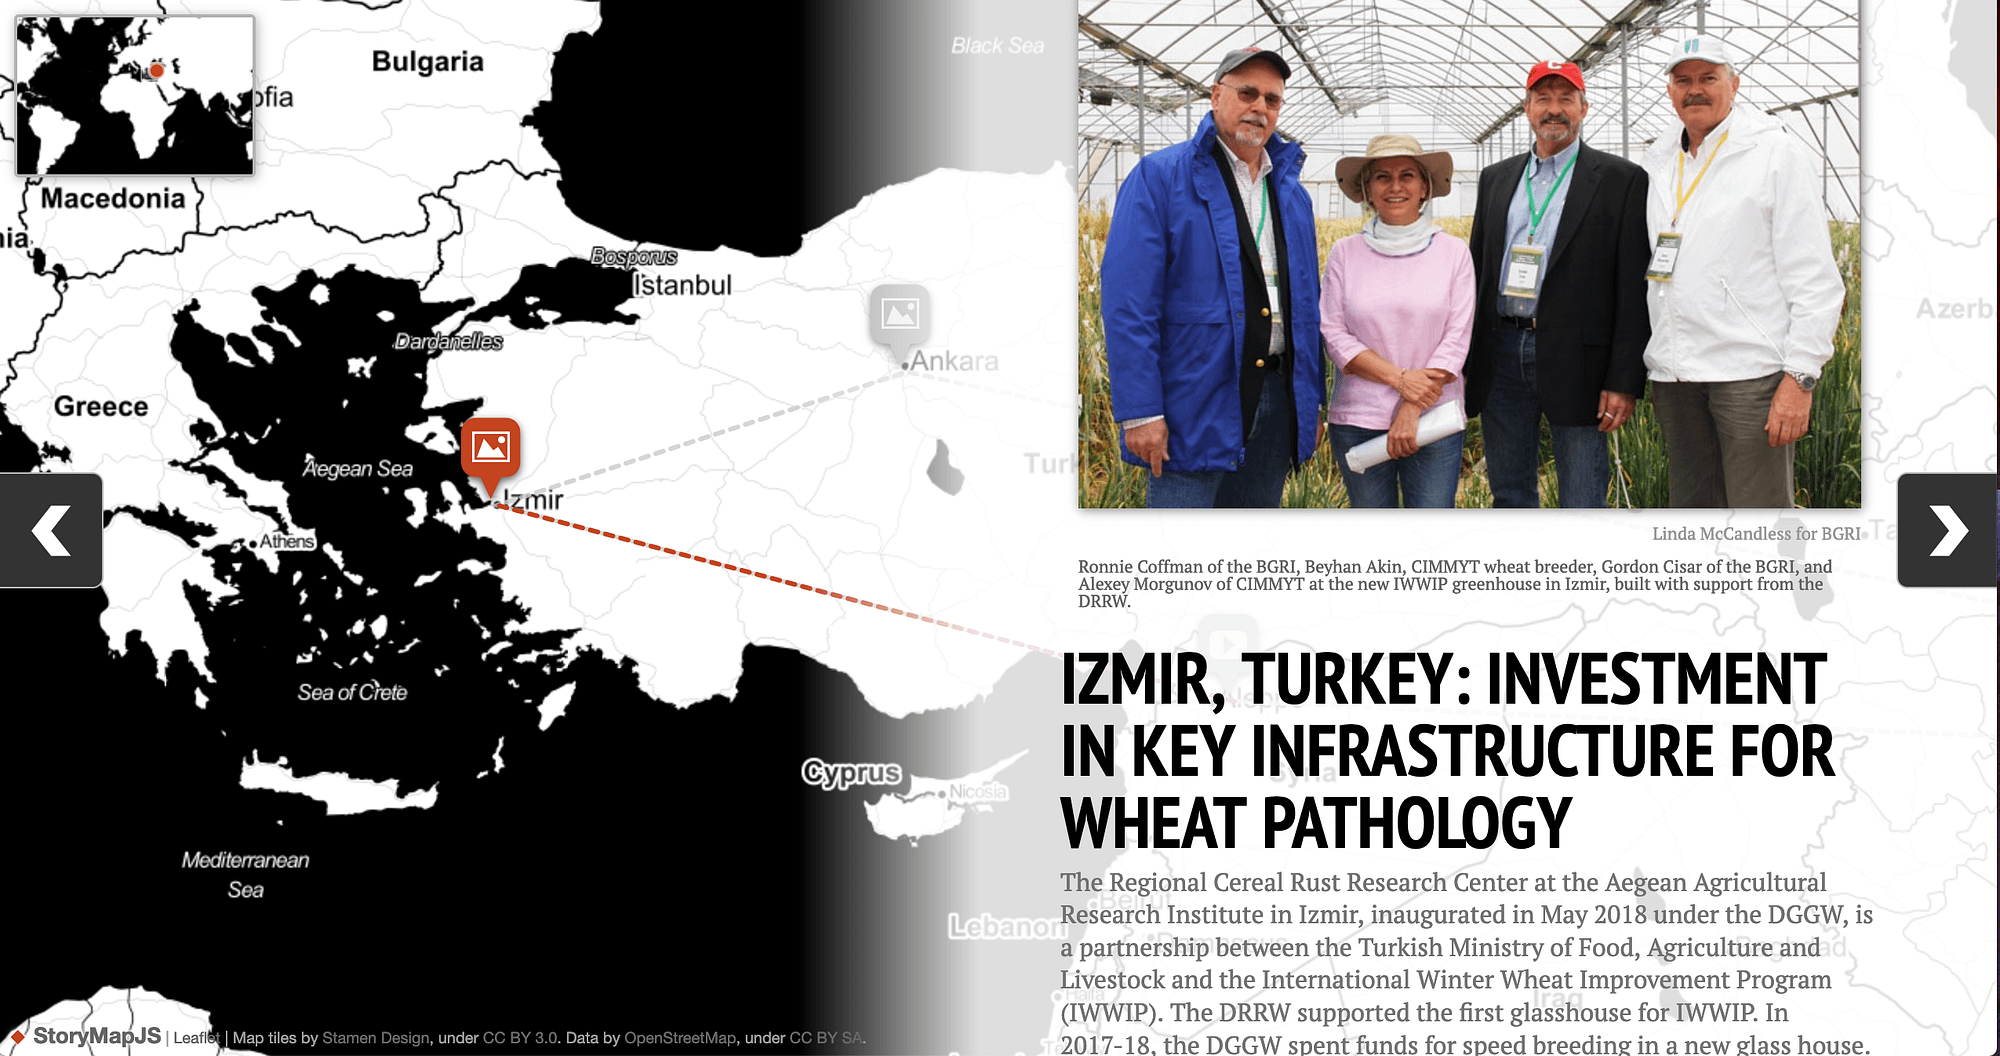 The new interactive map allows visitors to visually explore the milestones that allowed a global network of researchers to fight threats to wheat production.